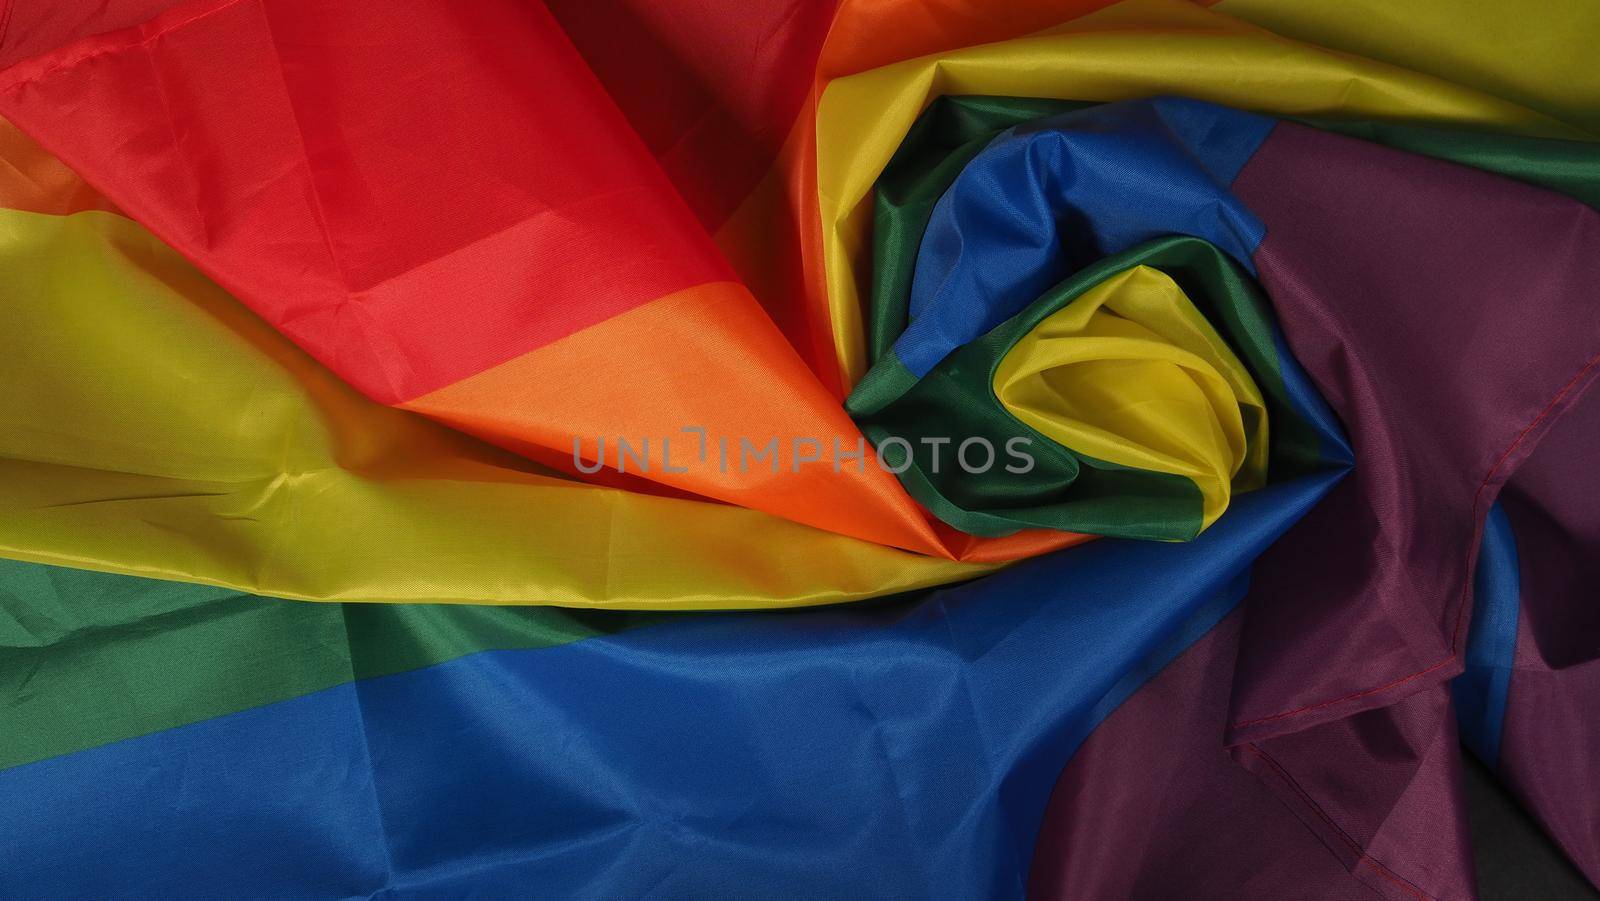 LGBTQ flag or Lesbian Gay Bi sexsual Transgender Queer or homosexsual pride by gnepphoto